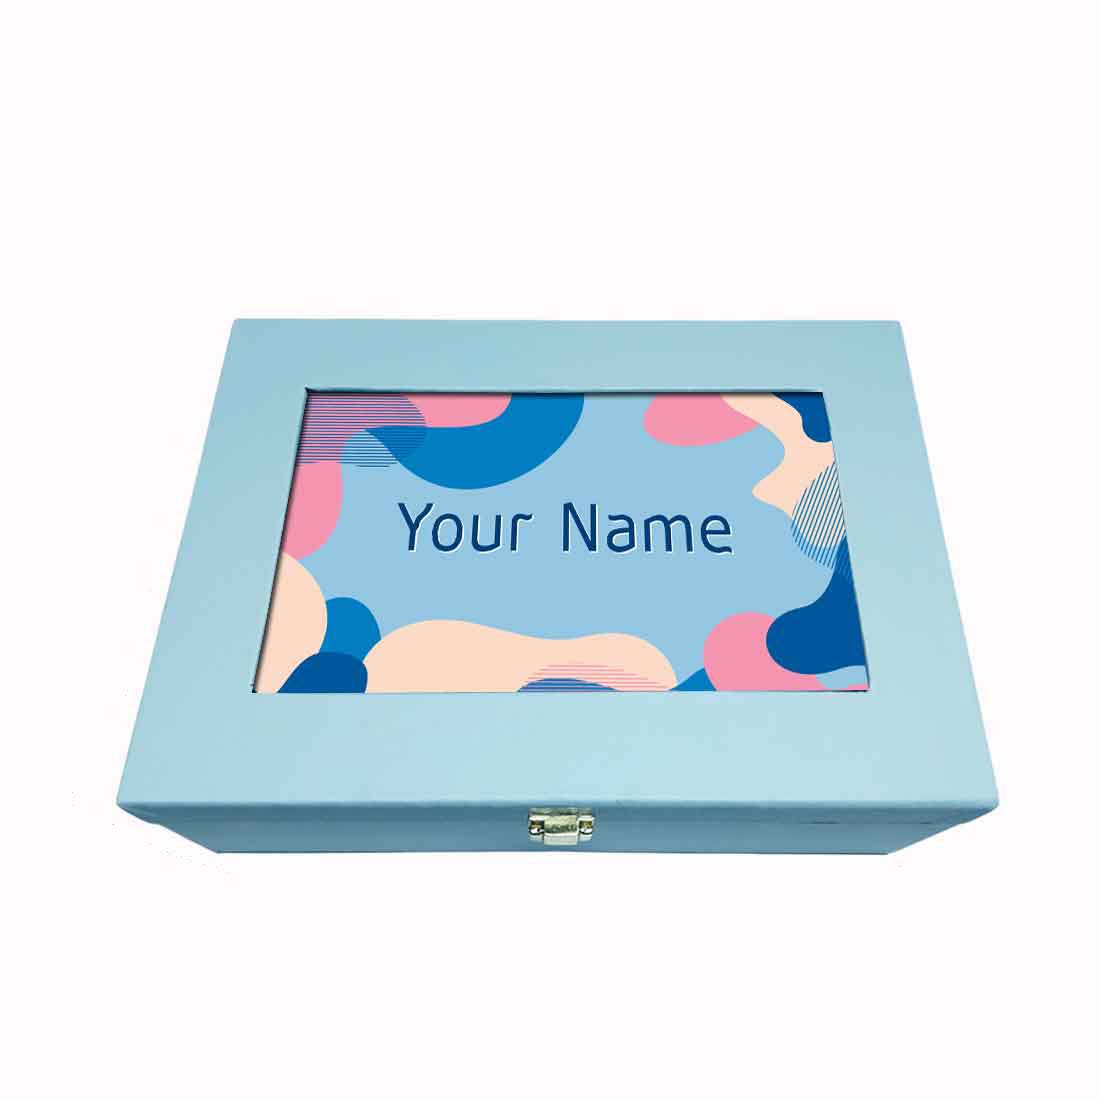 Decorative Personalised Jewellery Box for Gifting Women Girlfriend Add Your Name